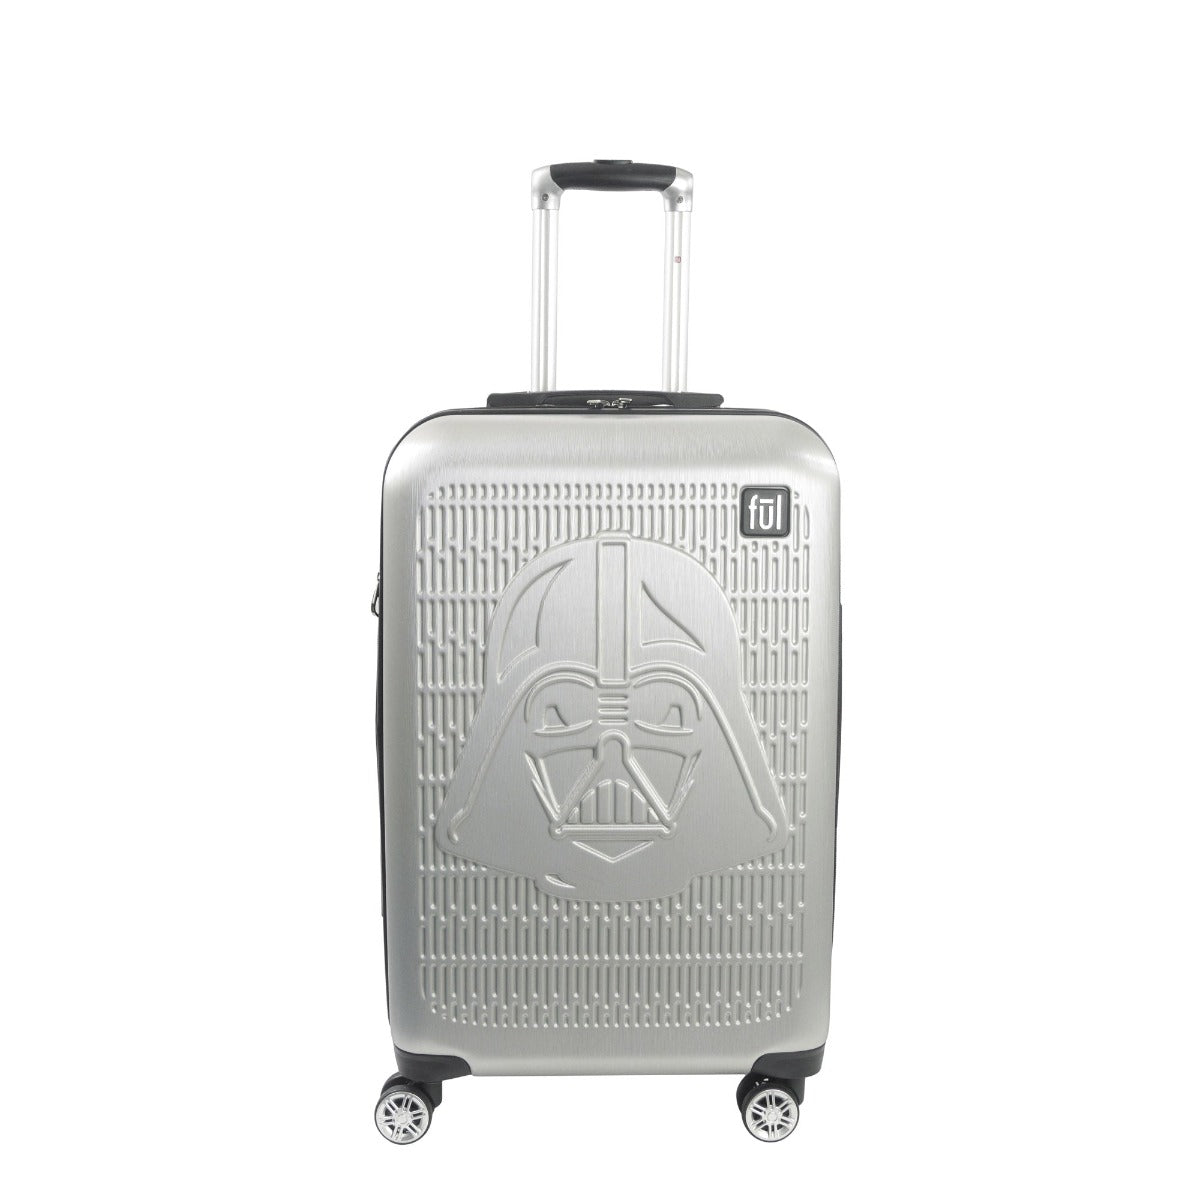 Star Wars Darth Vader spinner wheeled suitcase 25-inch luggage silver